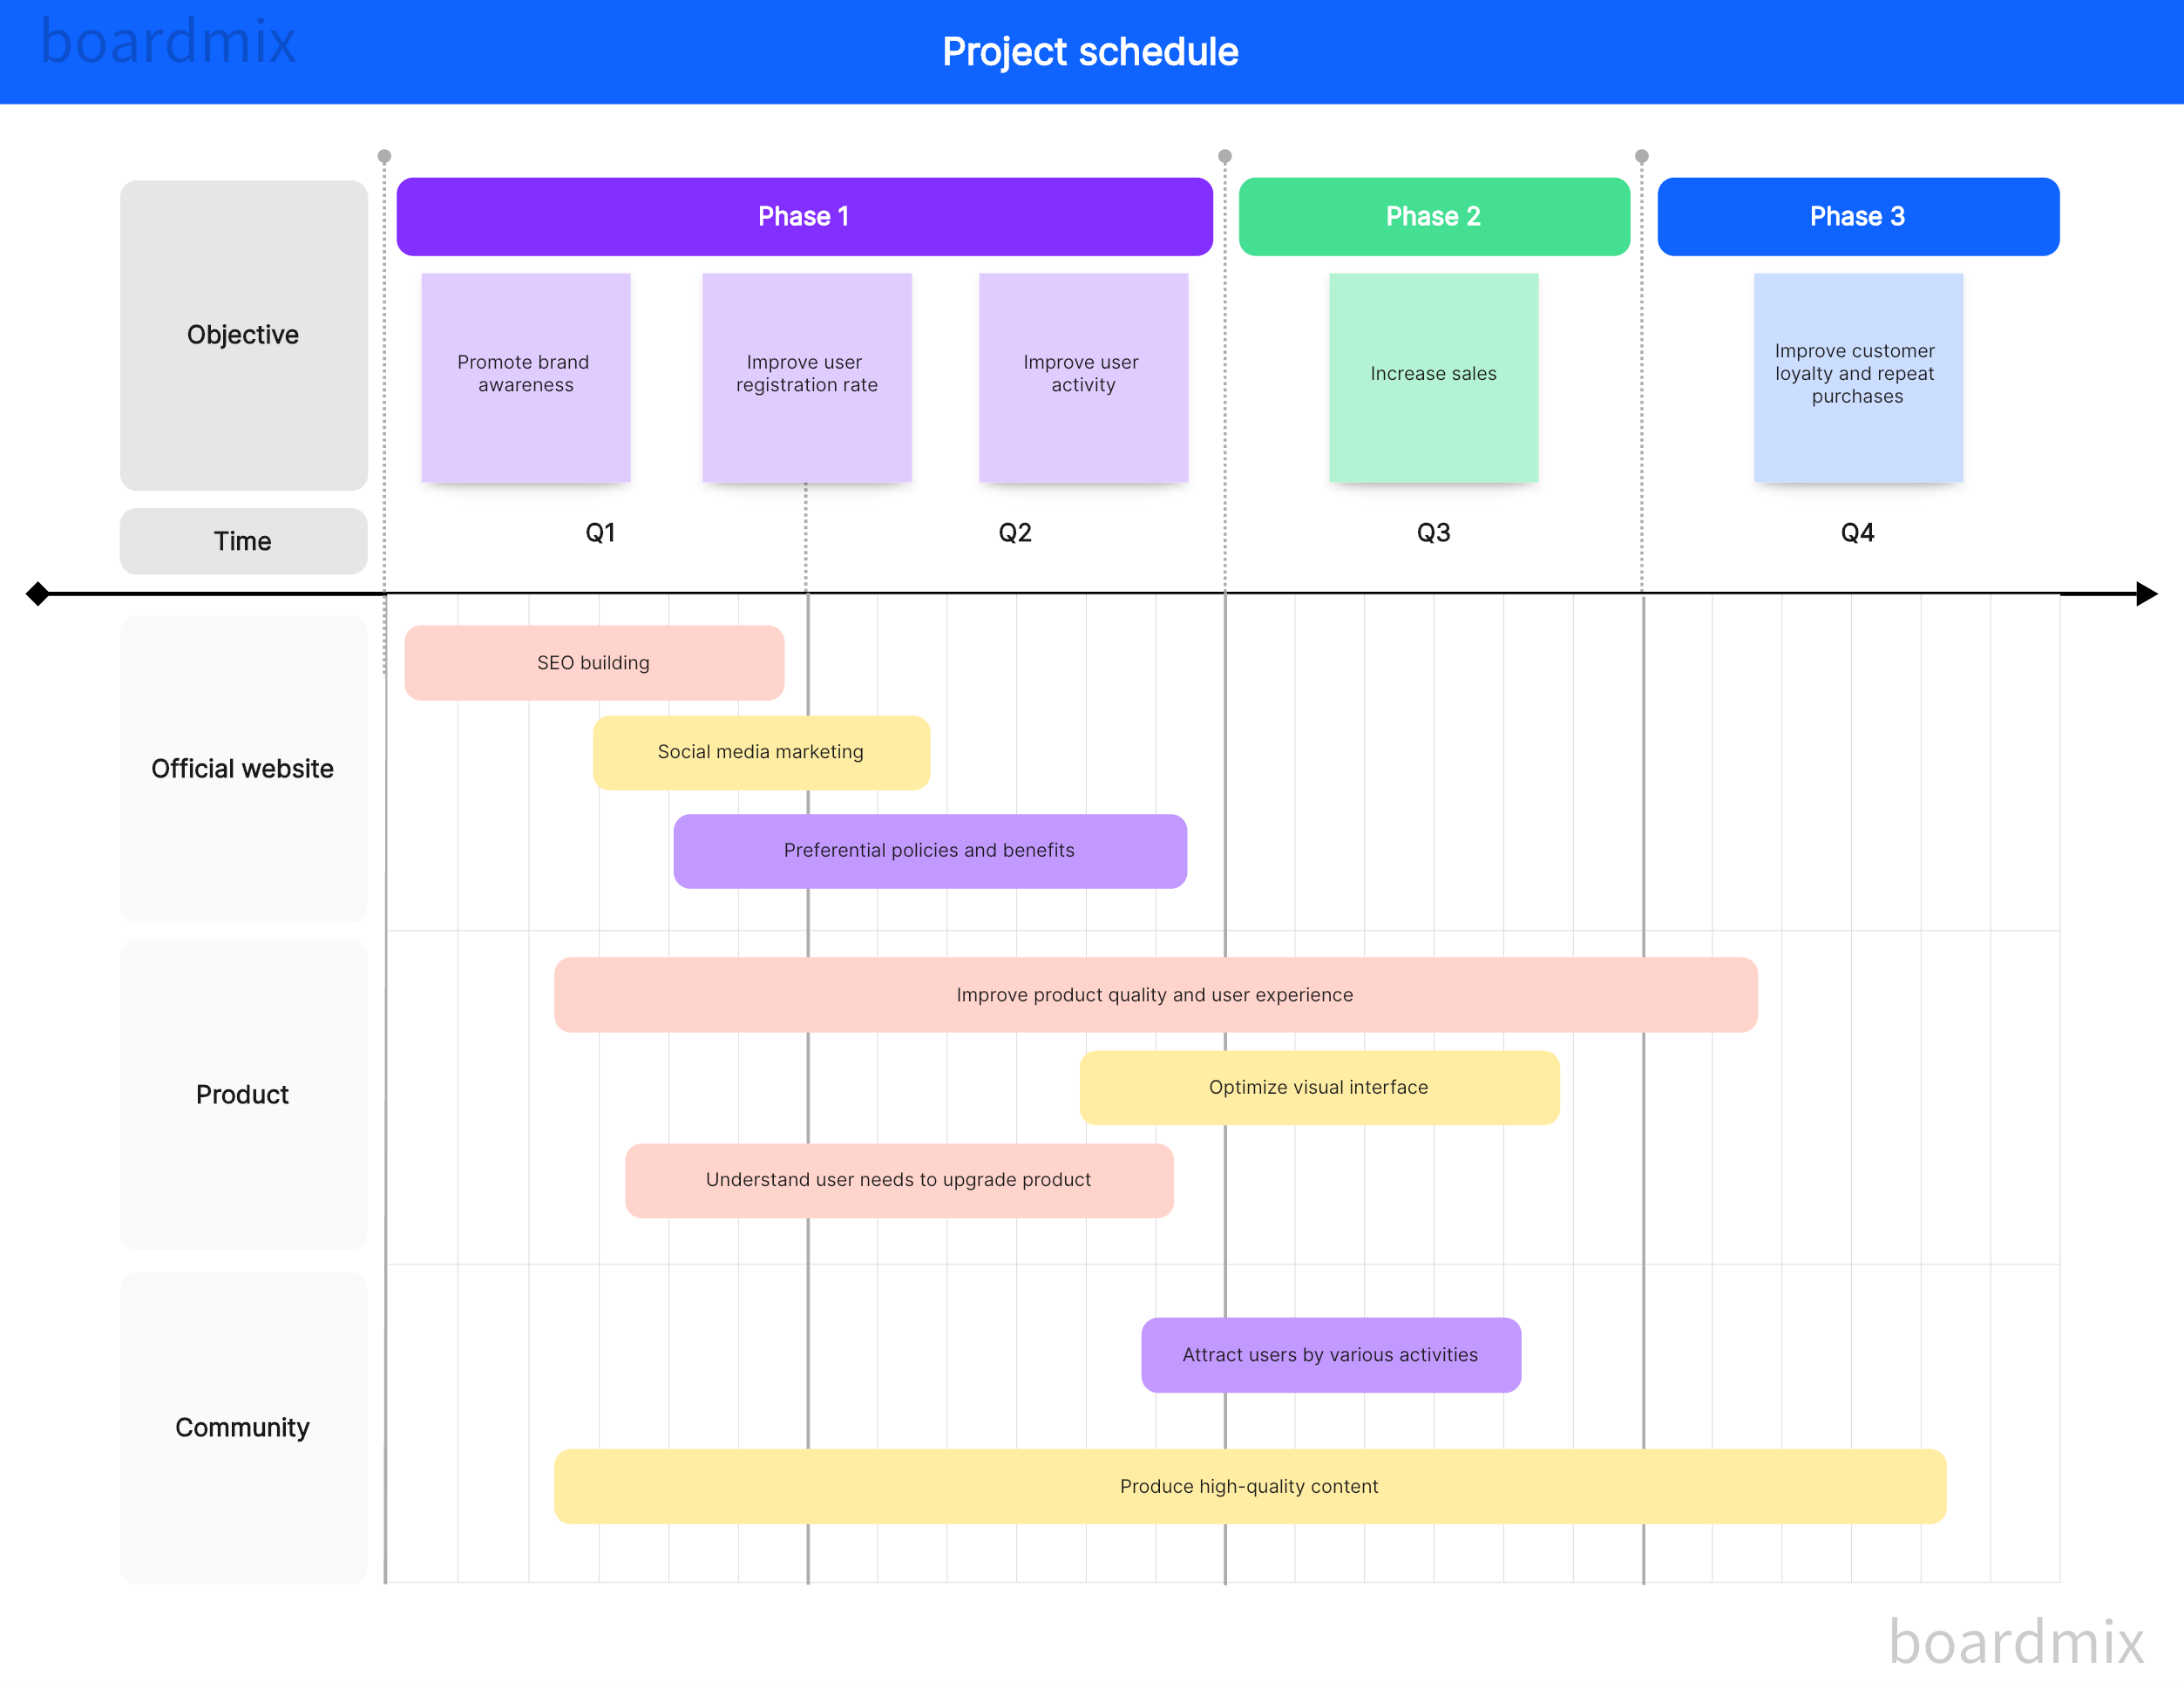 Project Timeline Example: A Step-by-Step Visual Guide